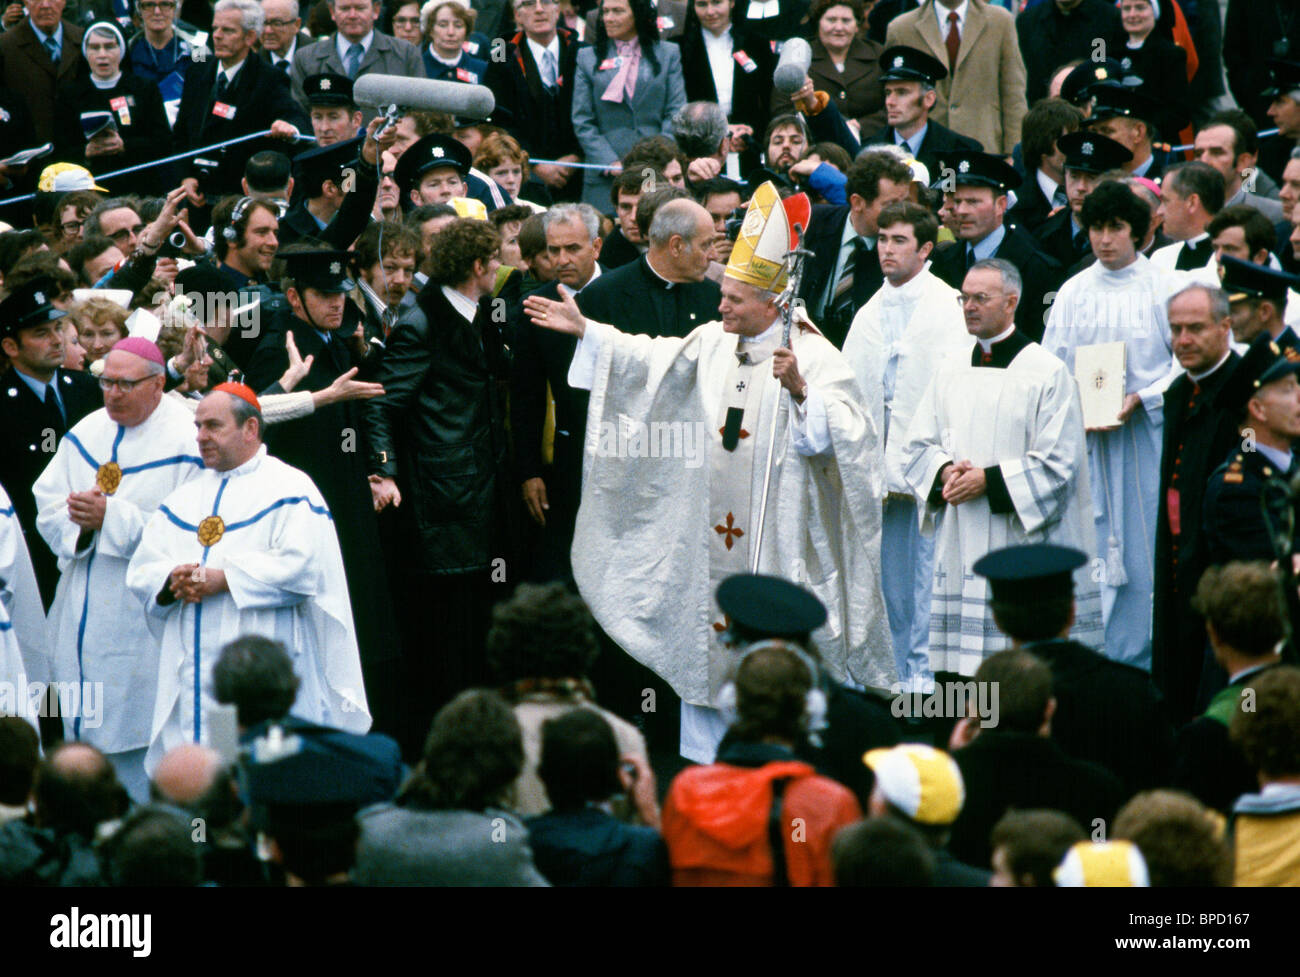 Pope John Paul II arrives to celebrate Mass at Knock during his visit to Ireland Stock Photo